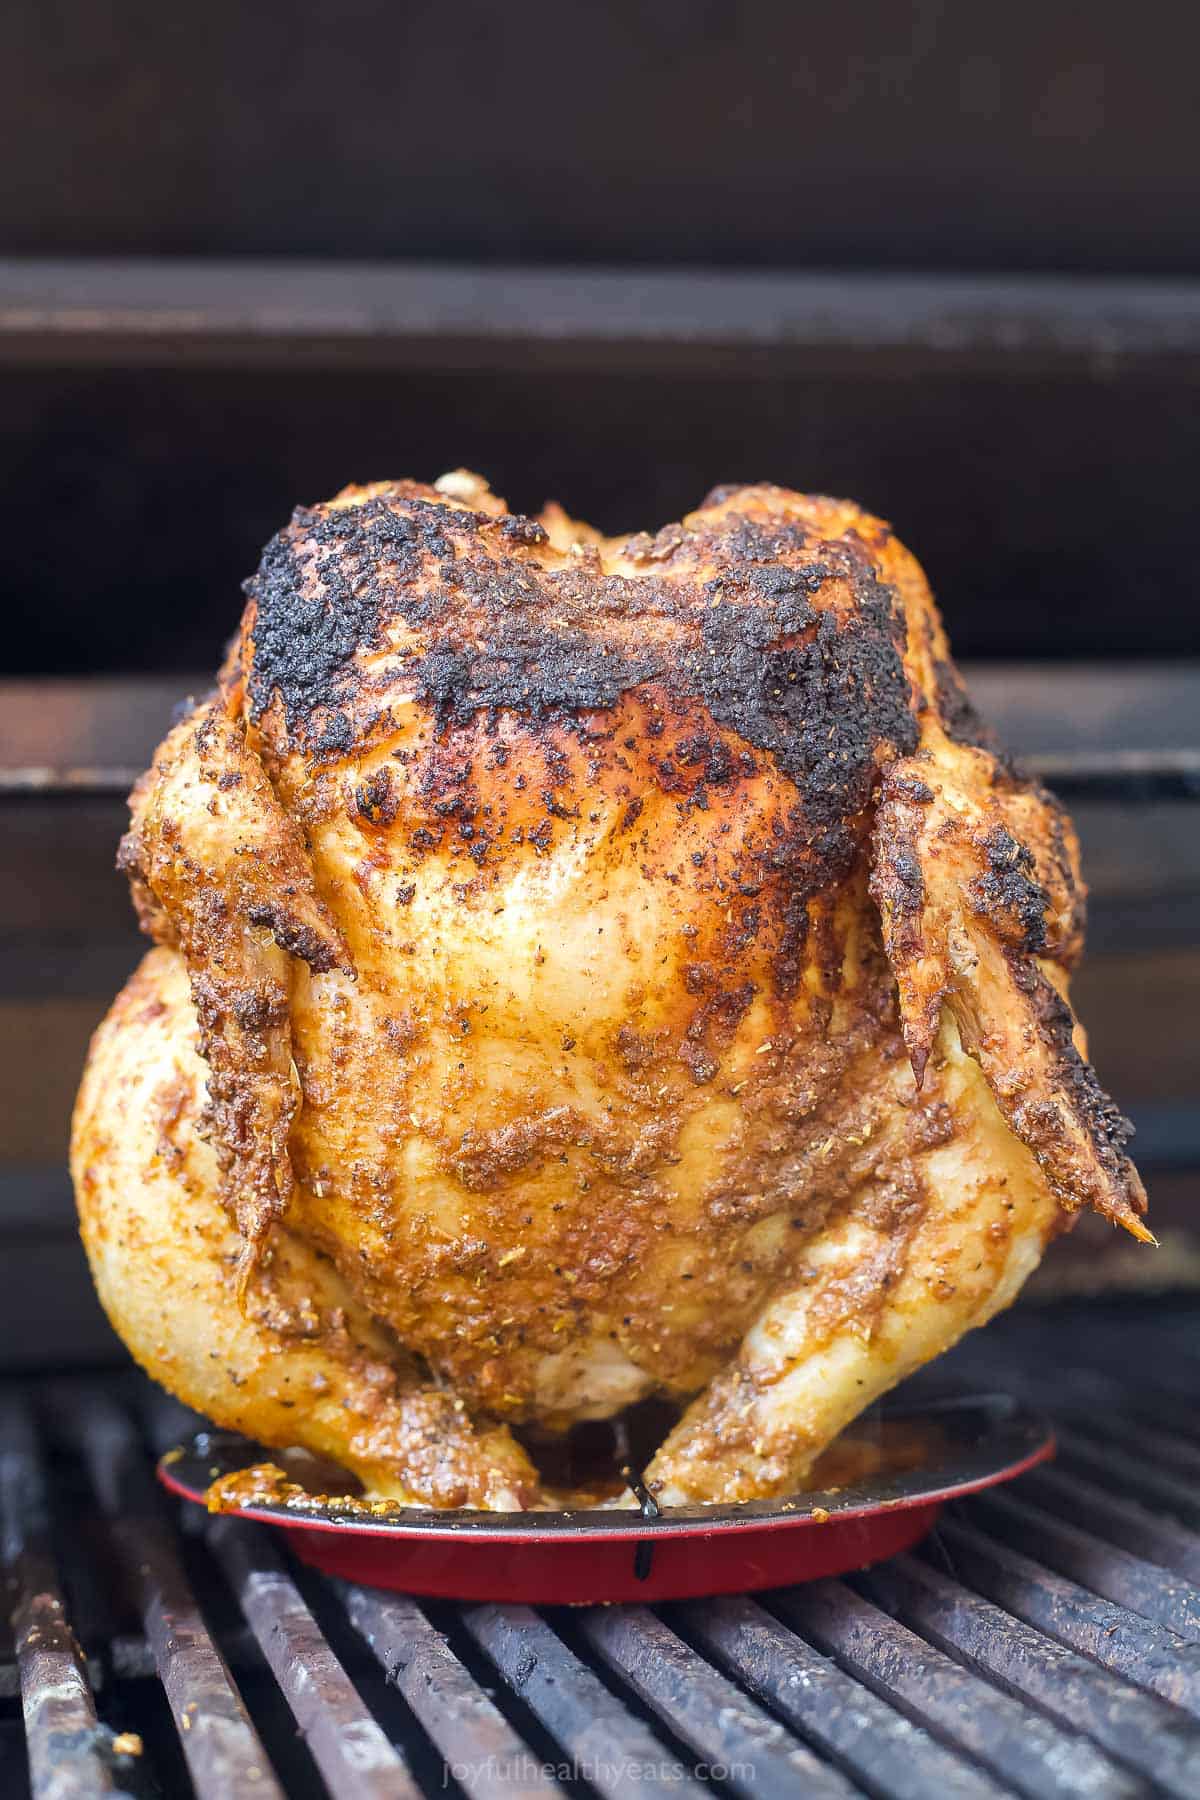 Grilled chicken on a vertical roaster.